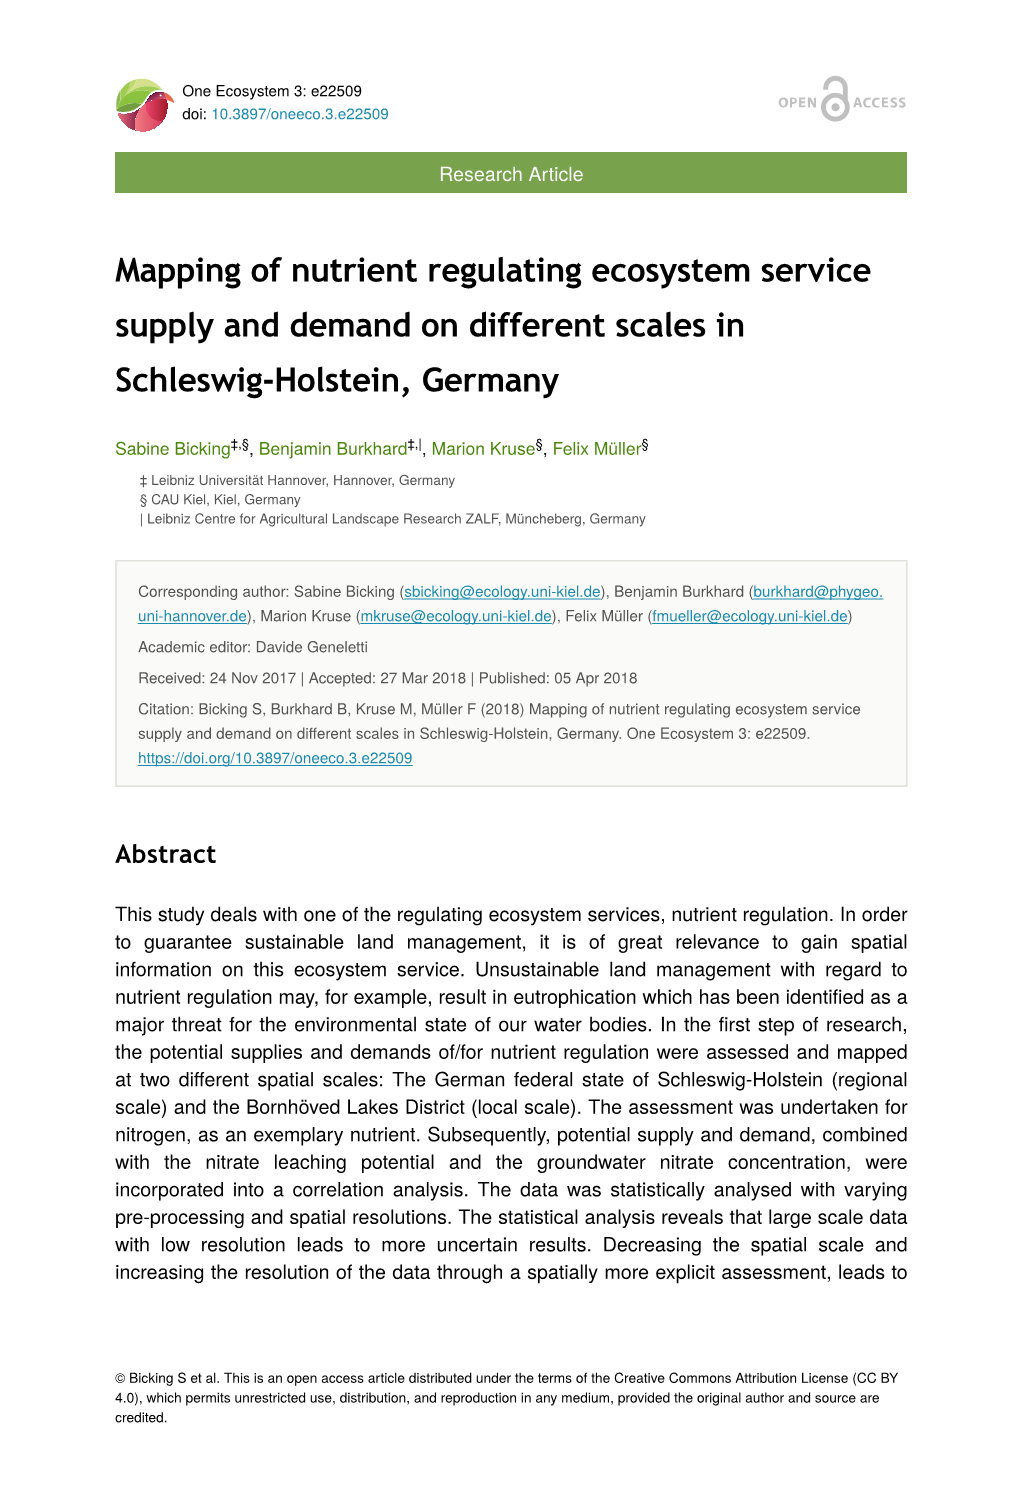 Mapping of Nutrient Regulating Ecosystem Service Supply and Demand on Different Scales in Schleswig-Holstein, Germany